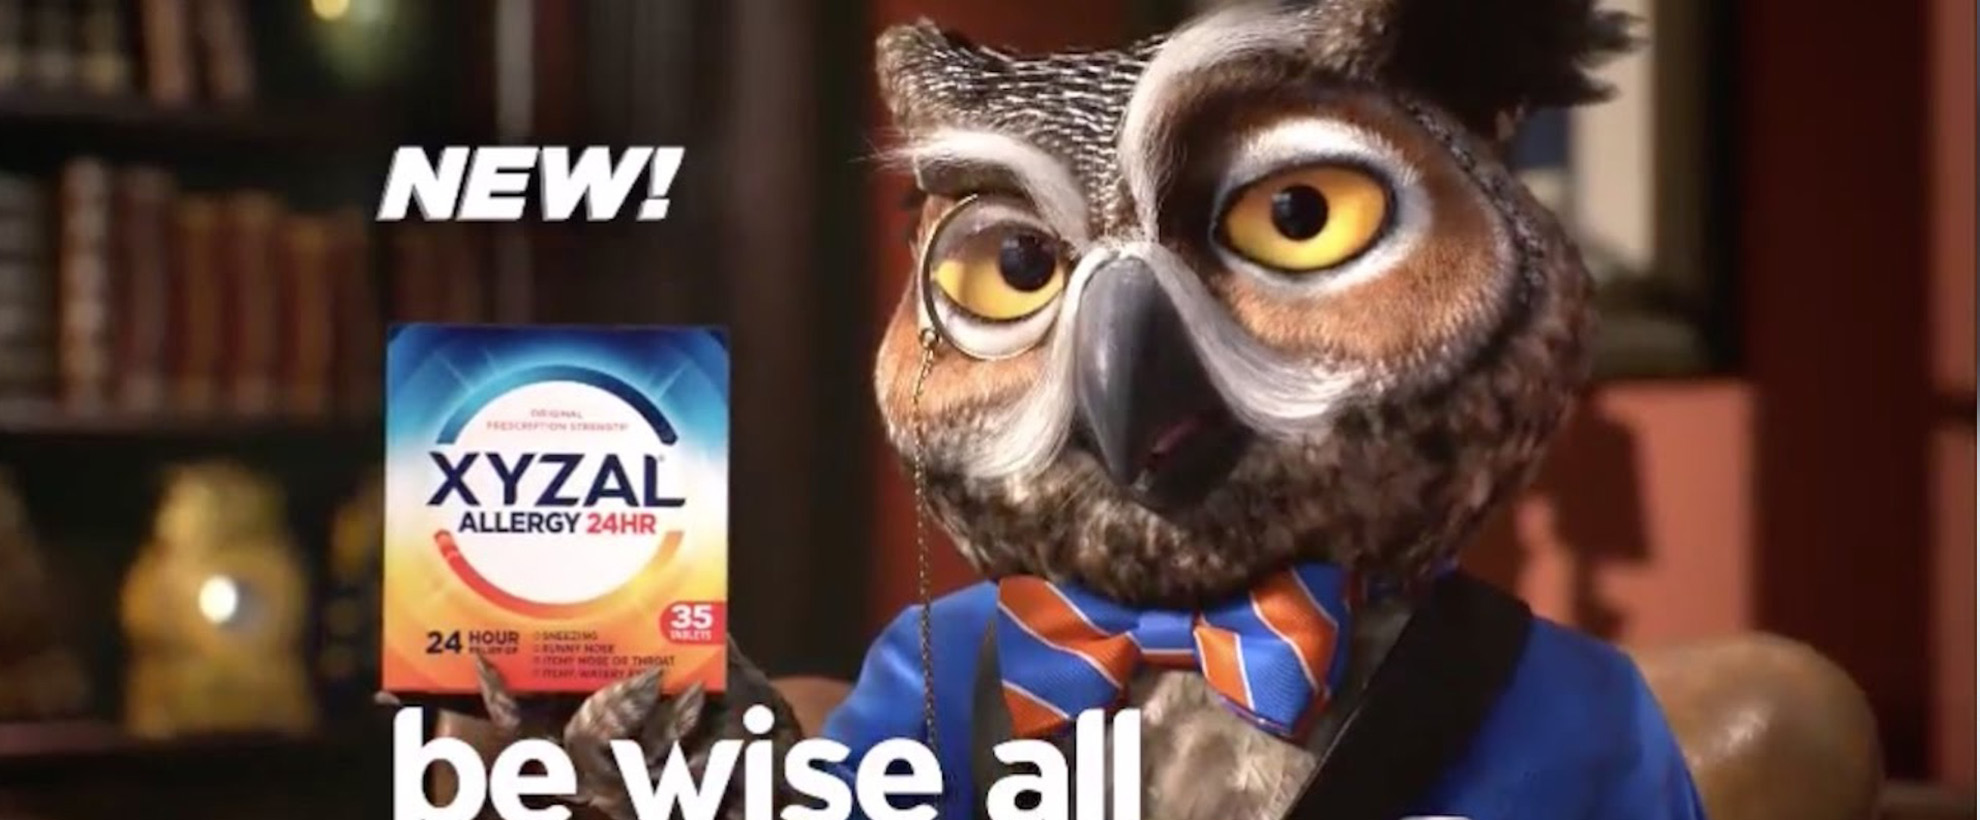 An animated owl with a monocle and a blue and orange striped bow tie holds up a box of XYZAL allergy medicine